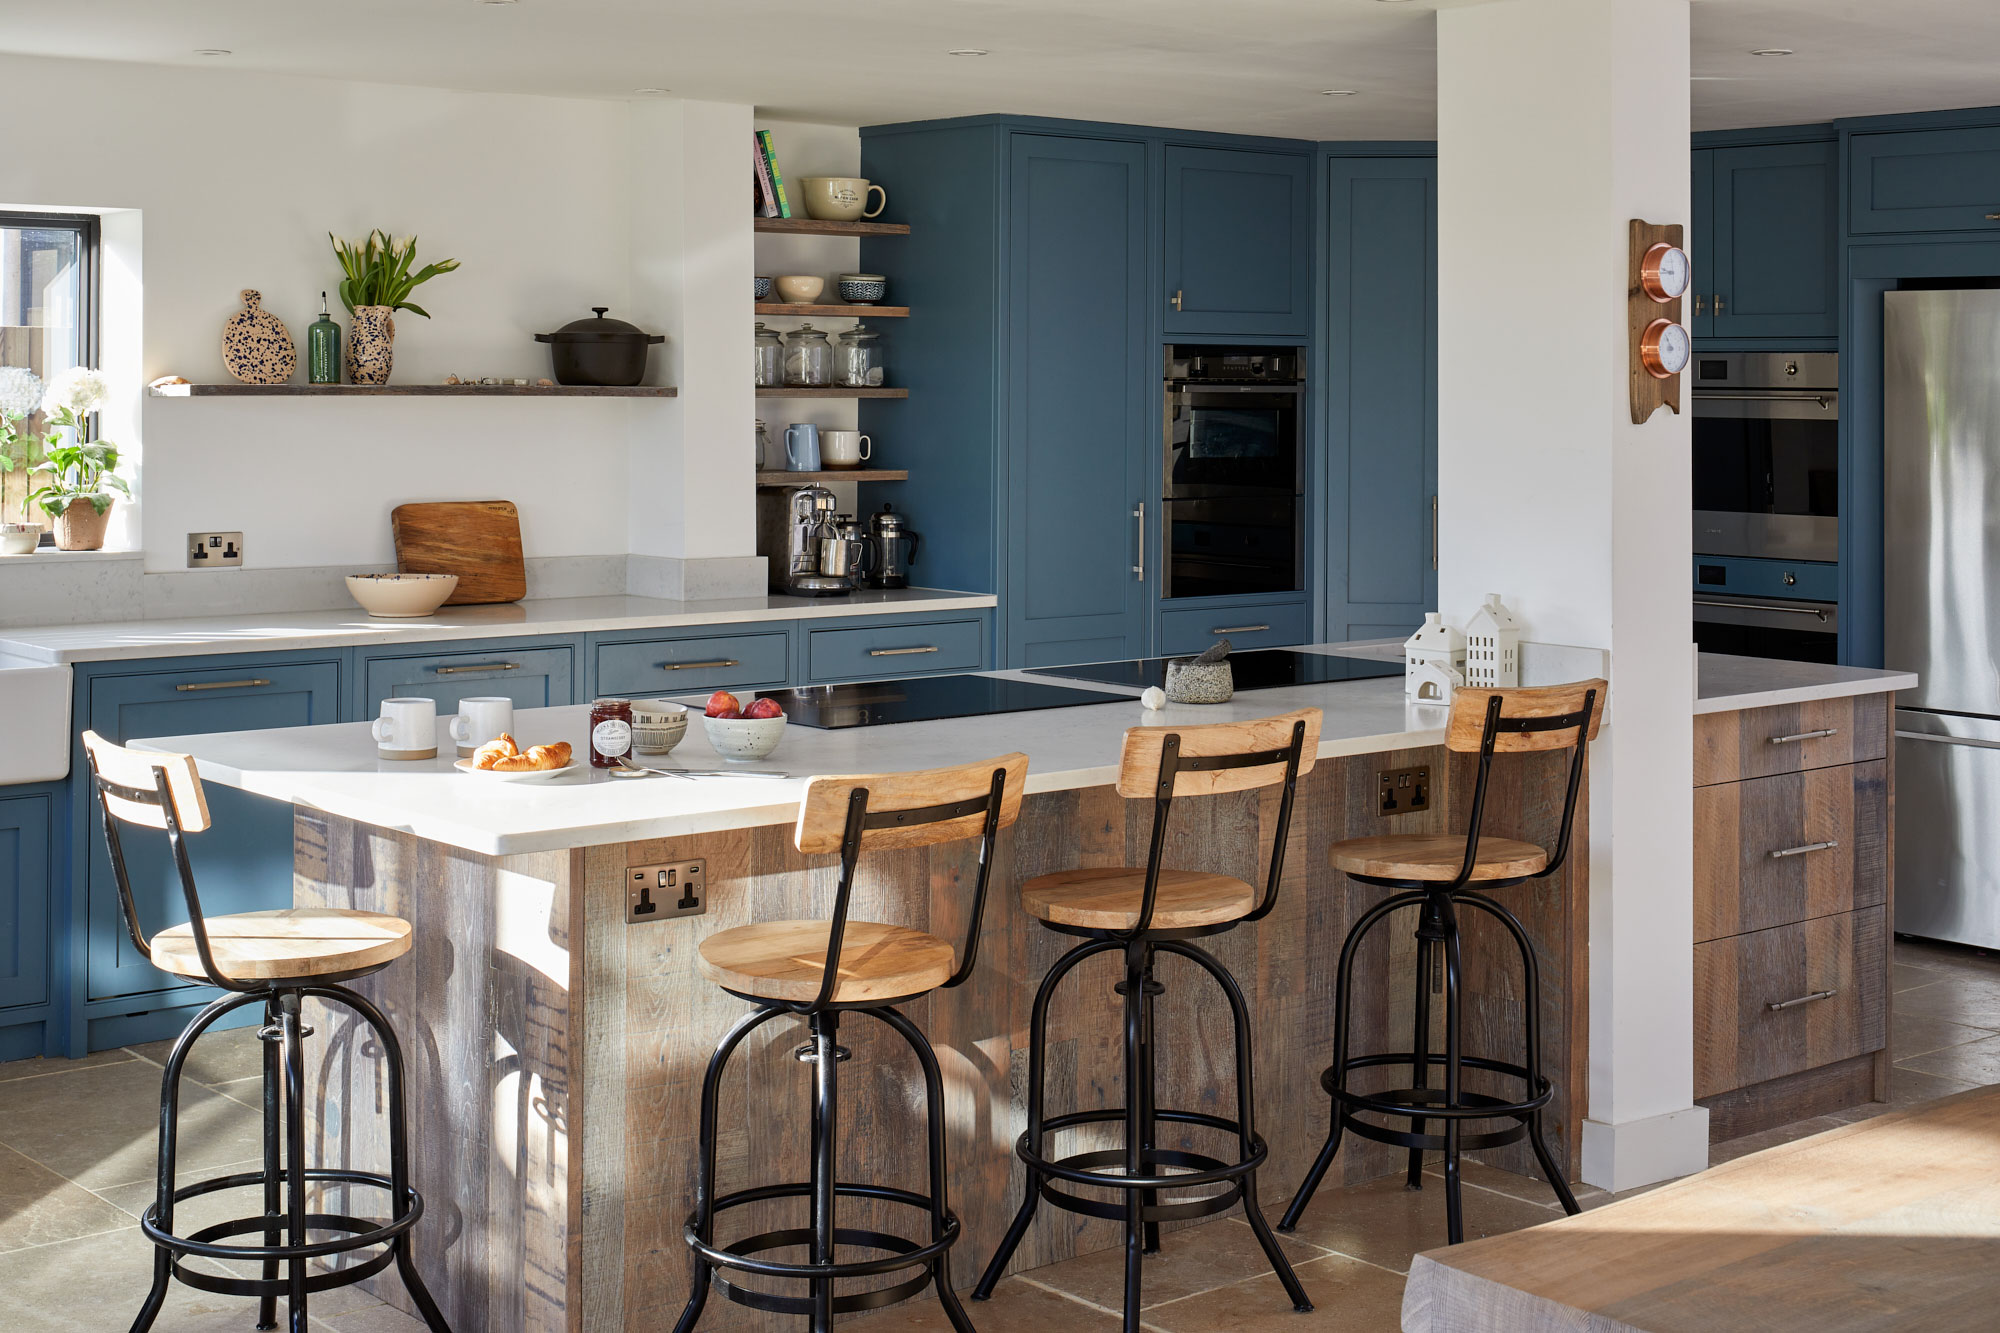 Rustic breakfast bar sits within this beautiful Kent kitchen